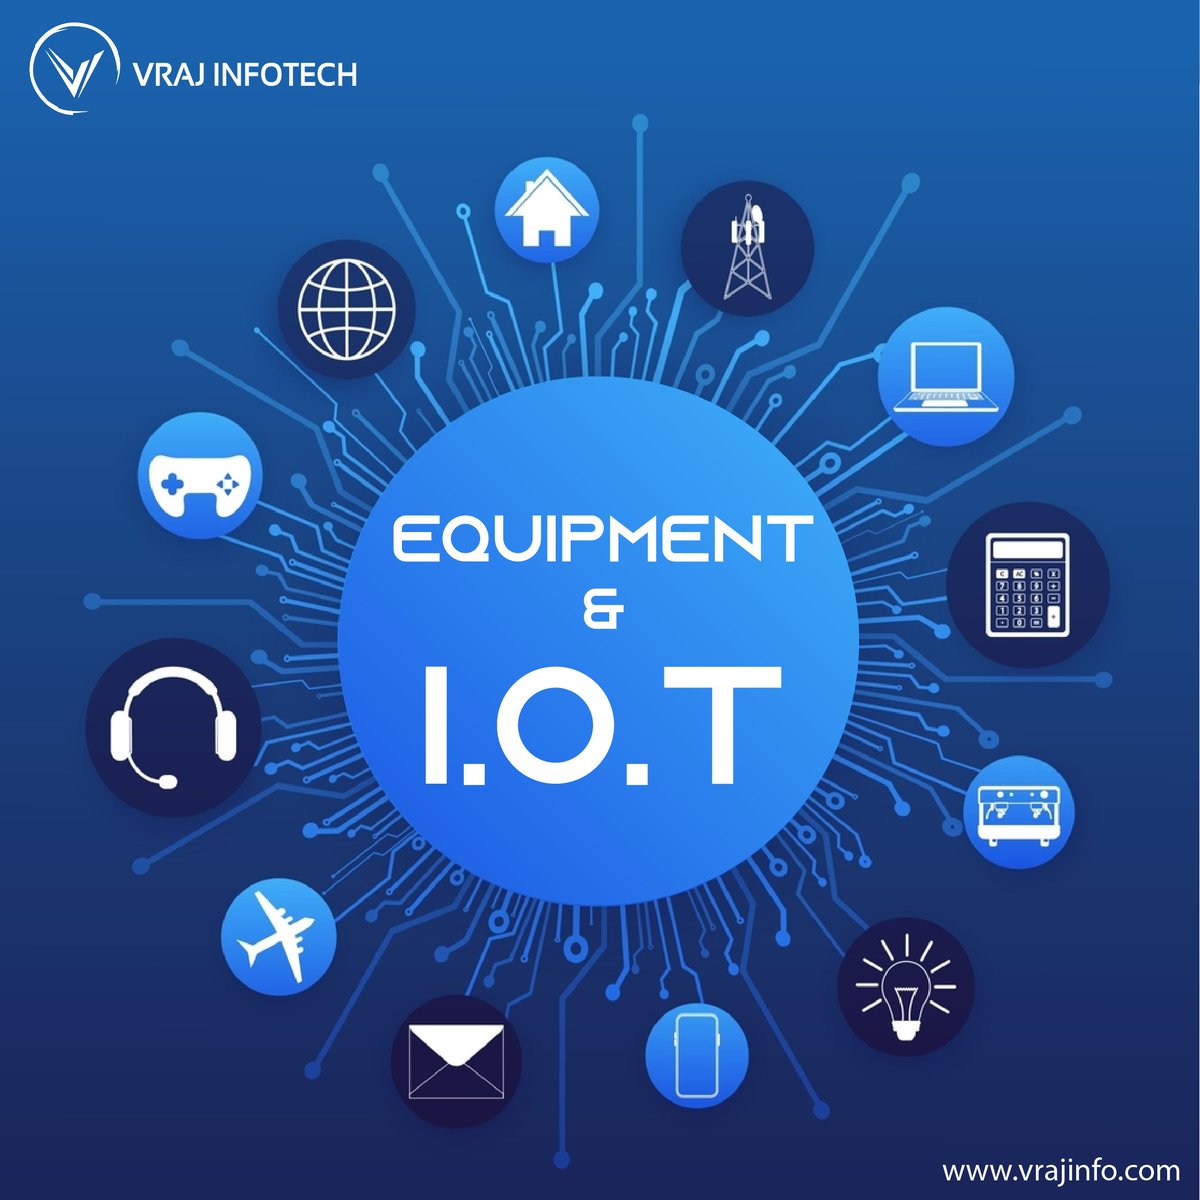 The intelligent world of IoT meets strong connected equipment in the future.
.
.
#vrajinfotech #IoT #Internetofthing #equipment